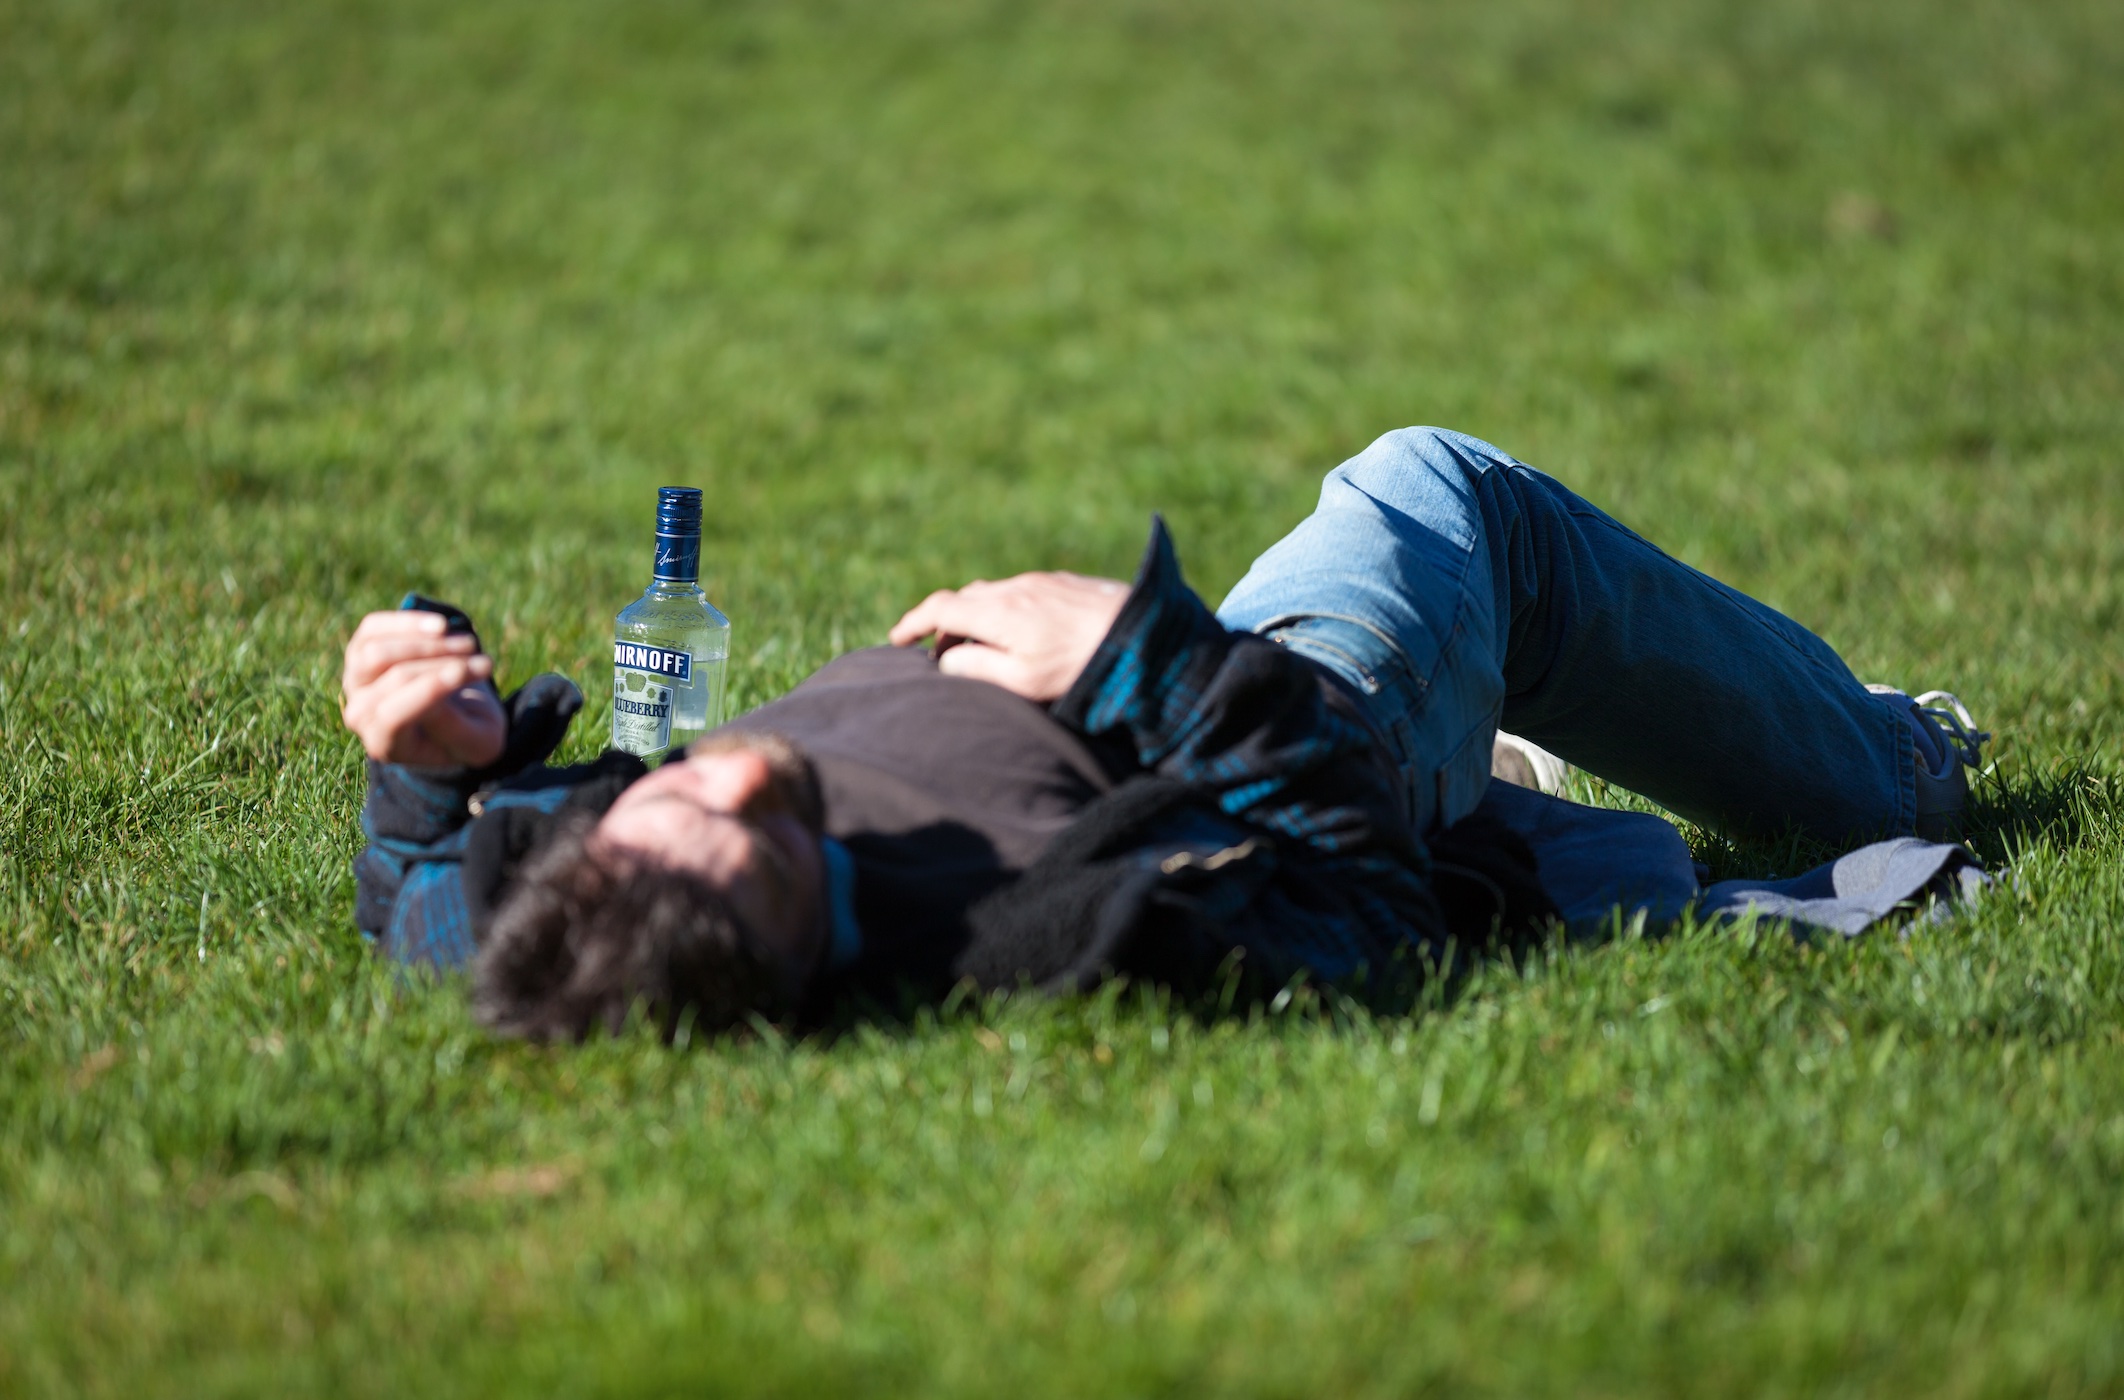 Man passed out on lawn in daylight, empty bottle at his side; image by Thom Masat, via Unsplash.com.